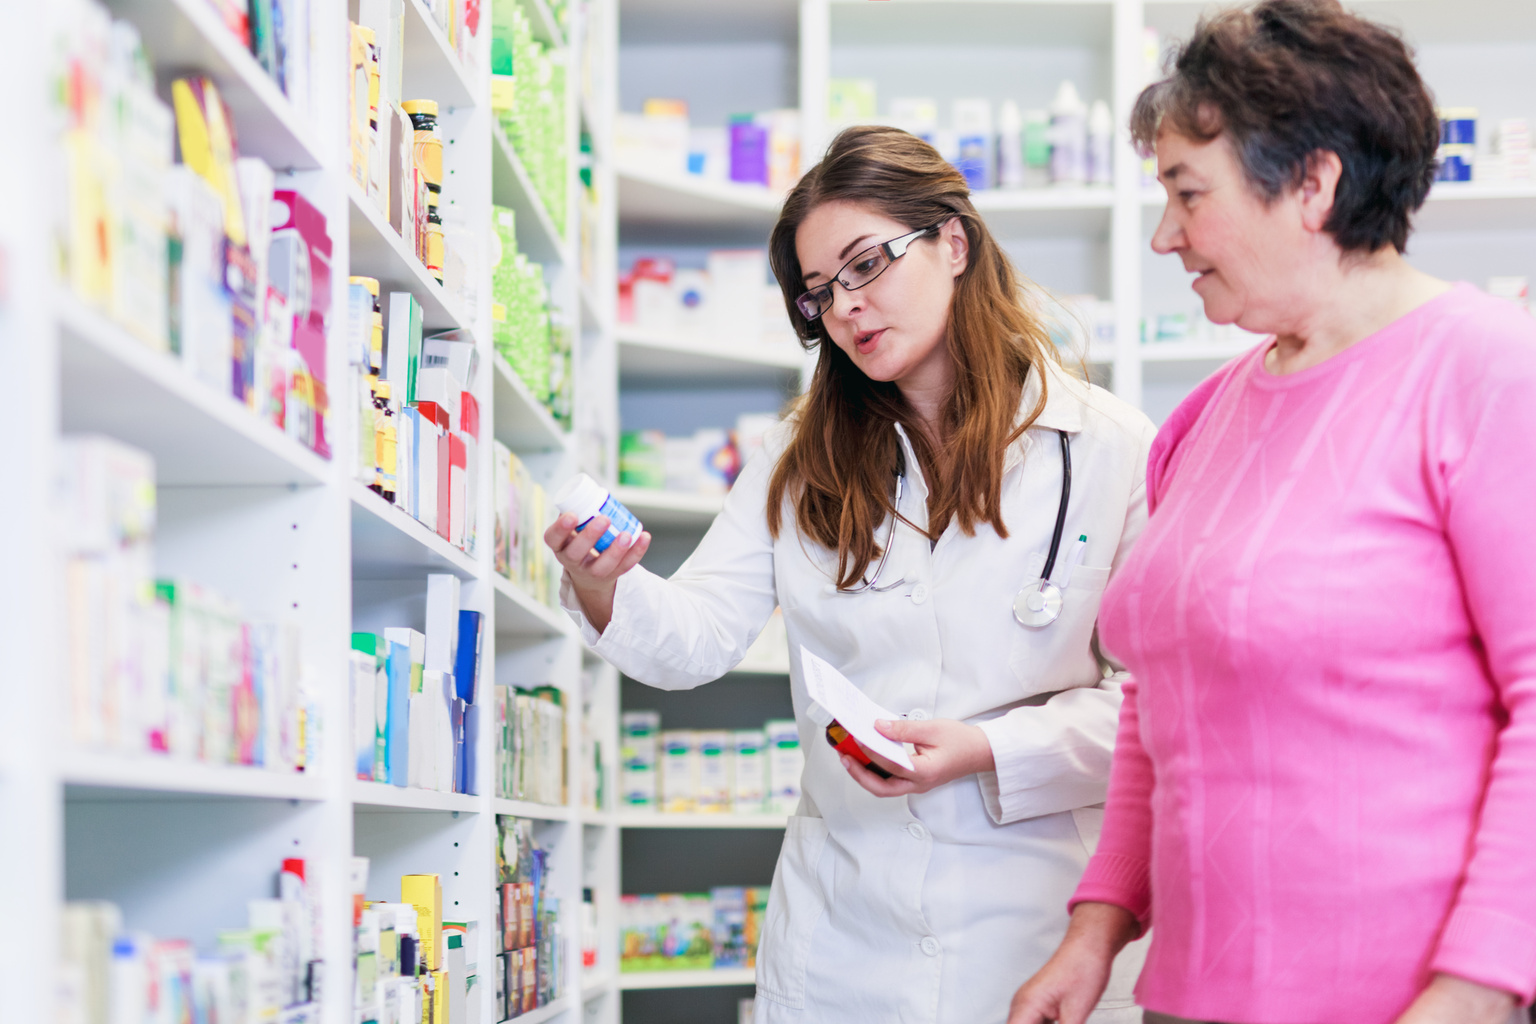 Safety, access, and affordability: How the pharmacist role is shifting